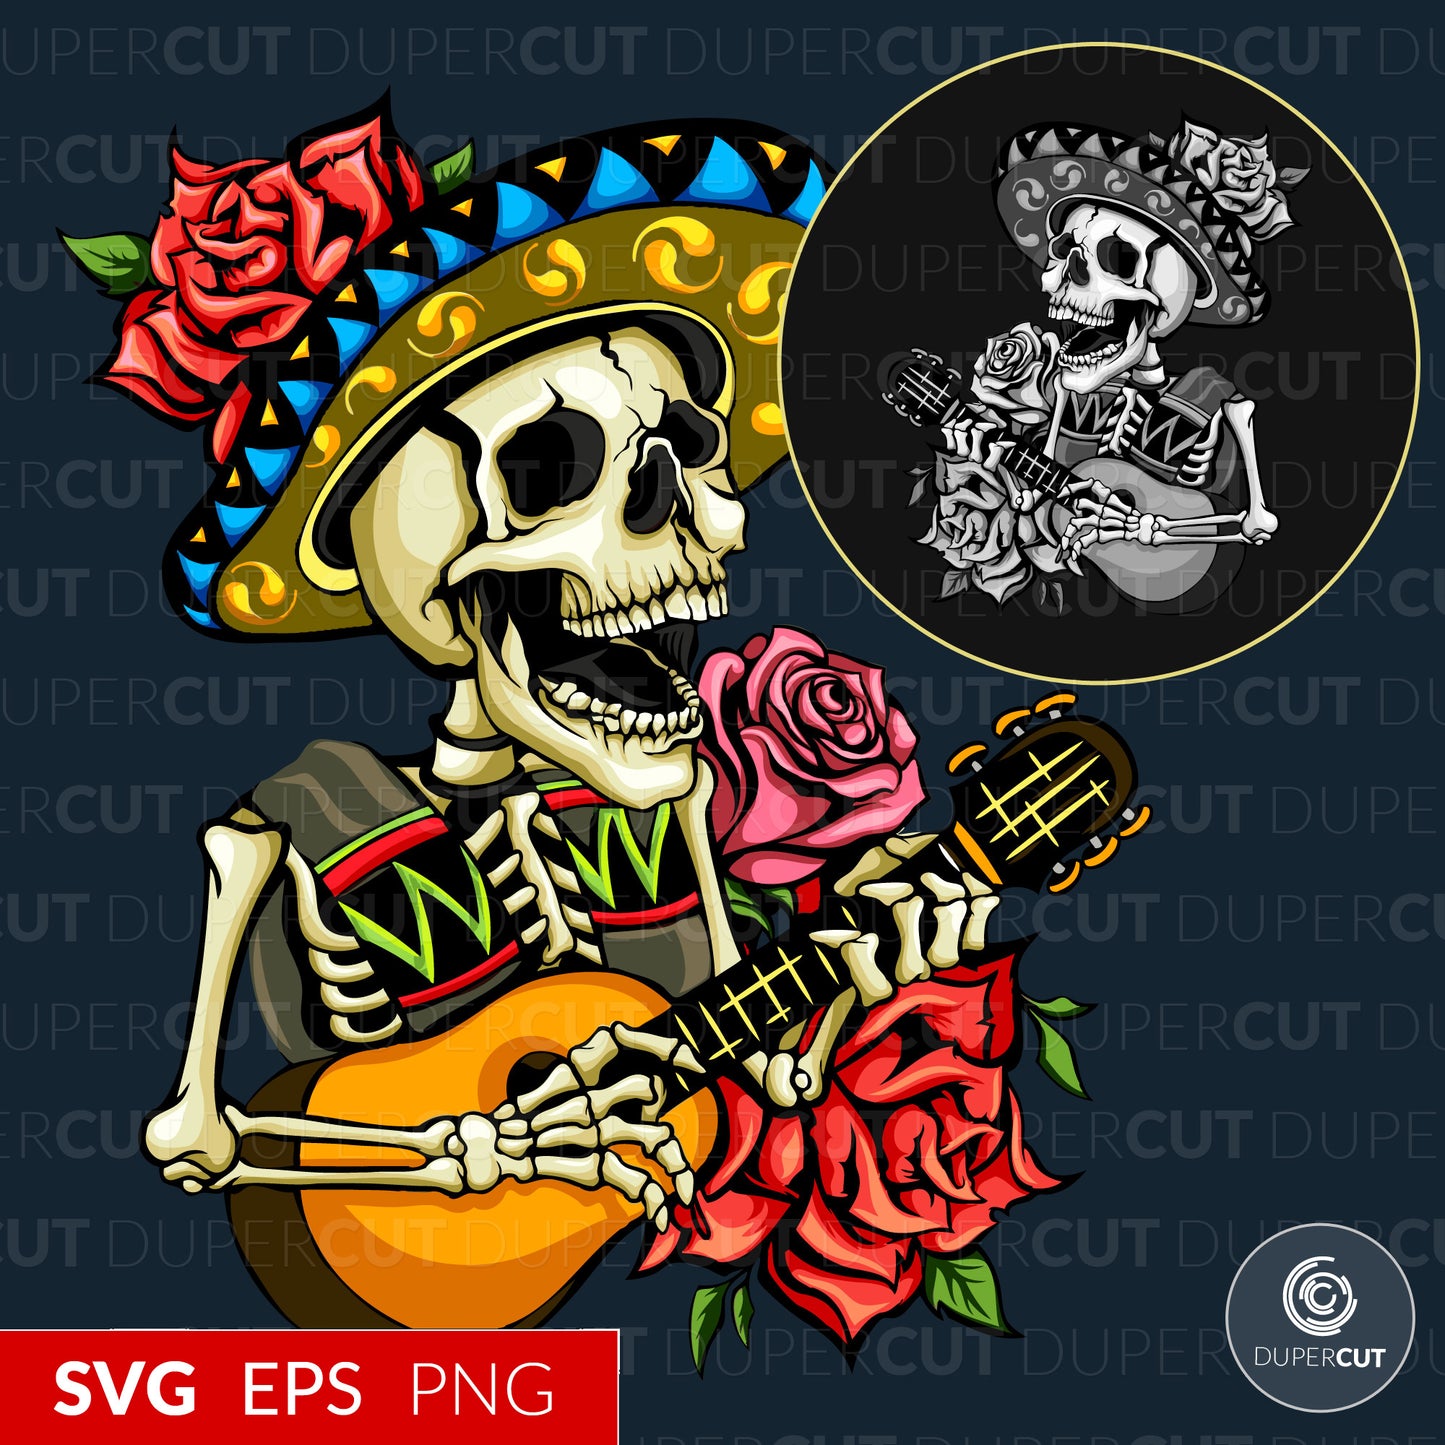 Mexican skull in sombrero - EPS, SVG, PNG files. Vector Colour illustration for print on demand, sublimation, custom t-shirts, hoodies, tumblers.